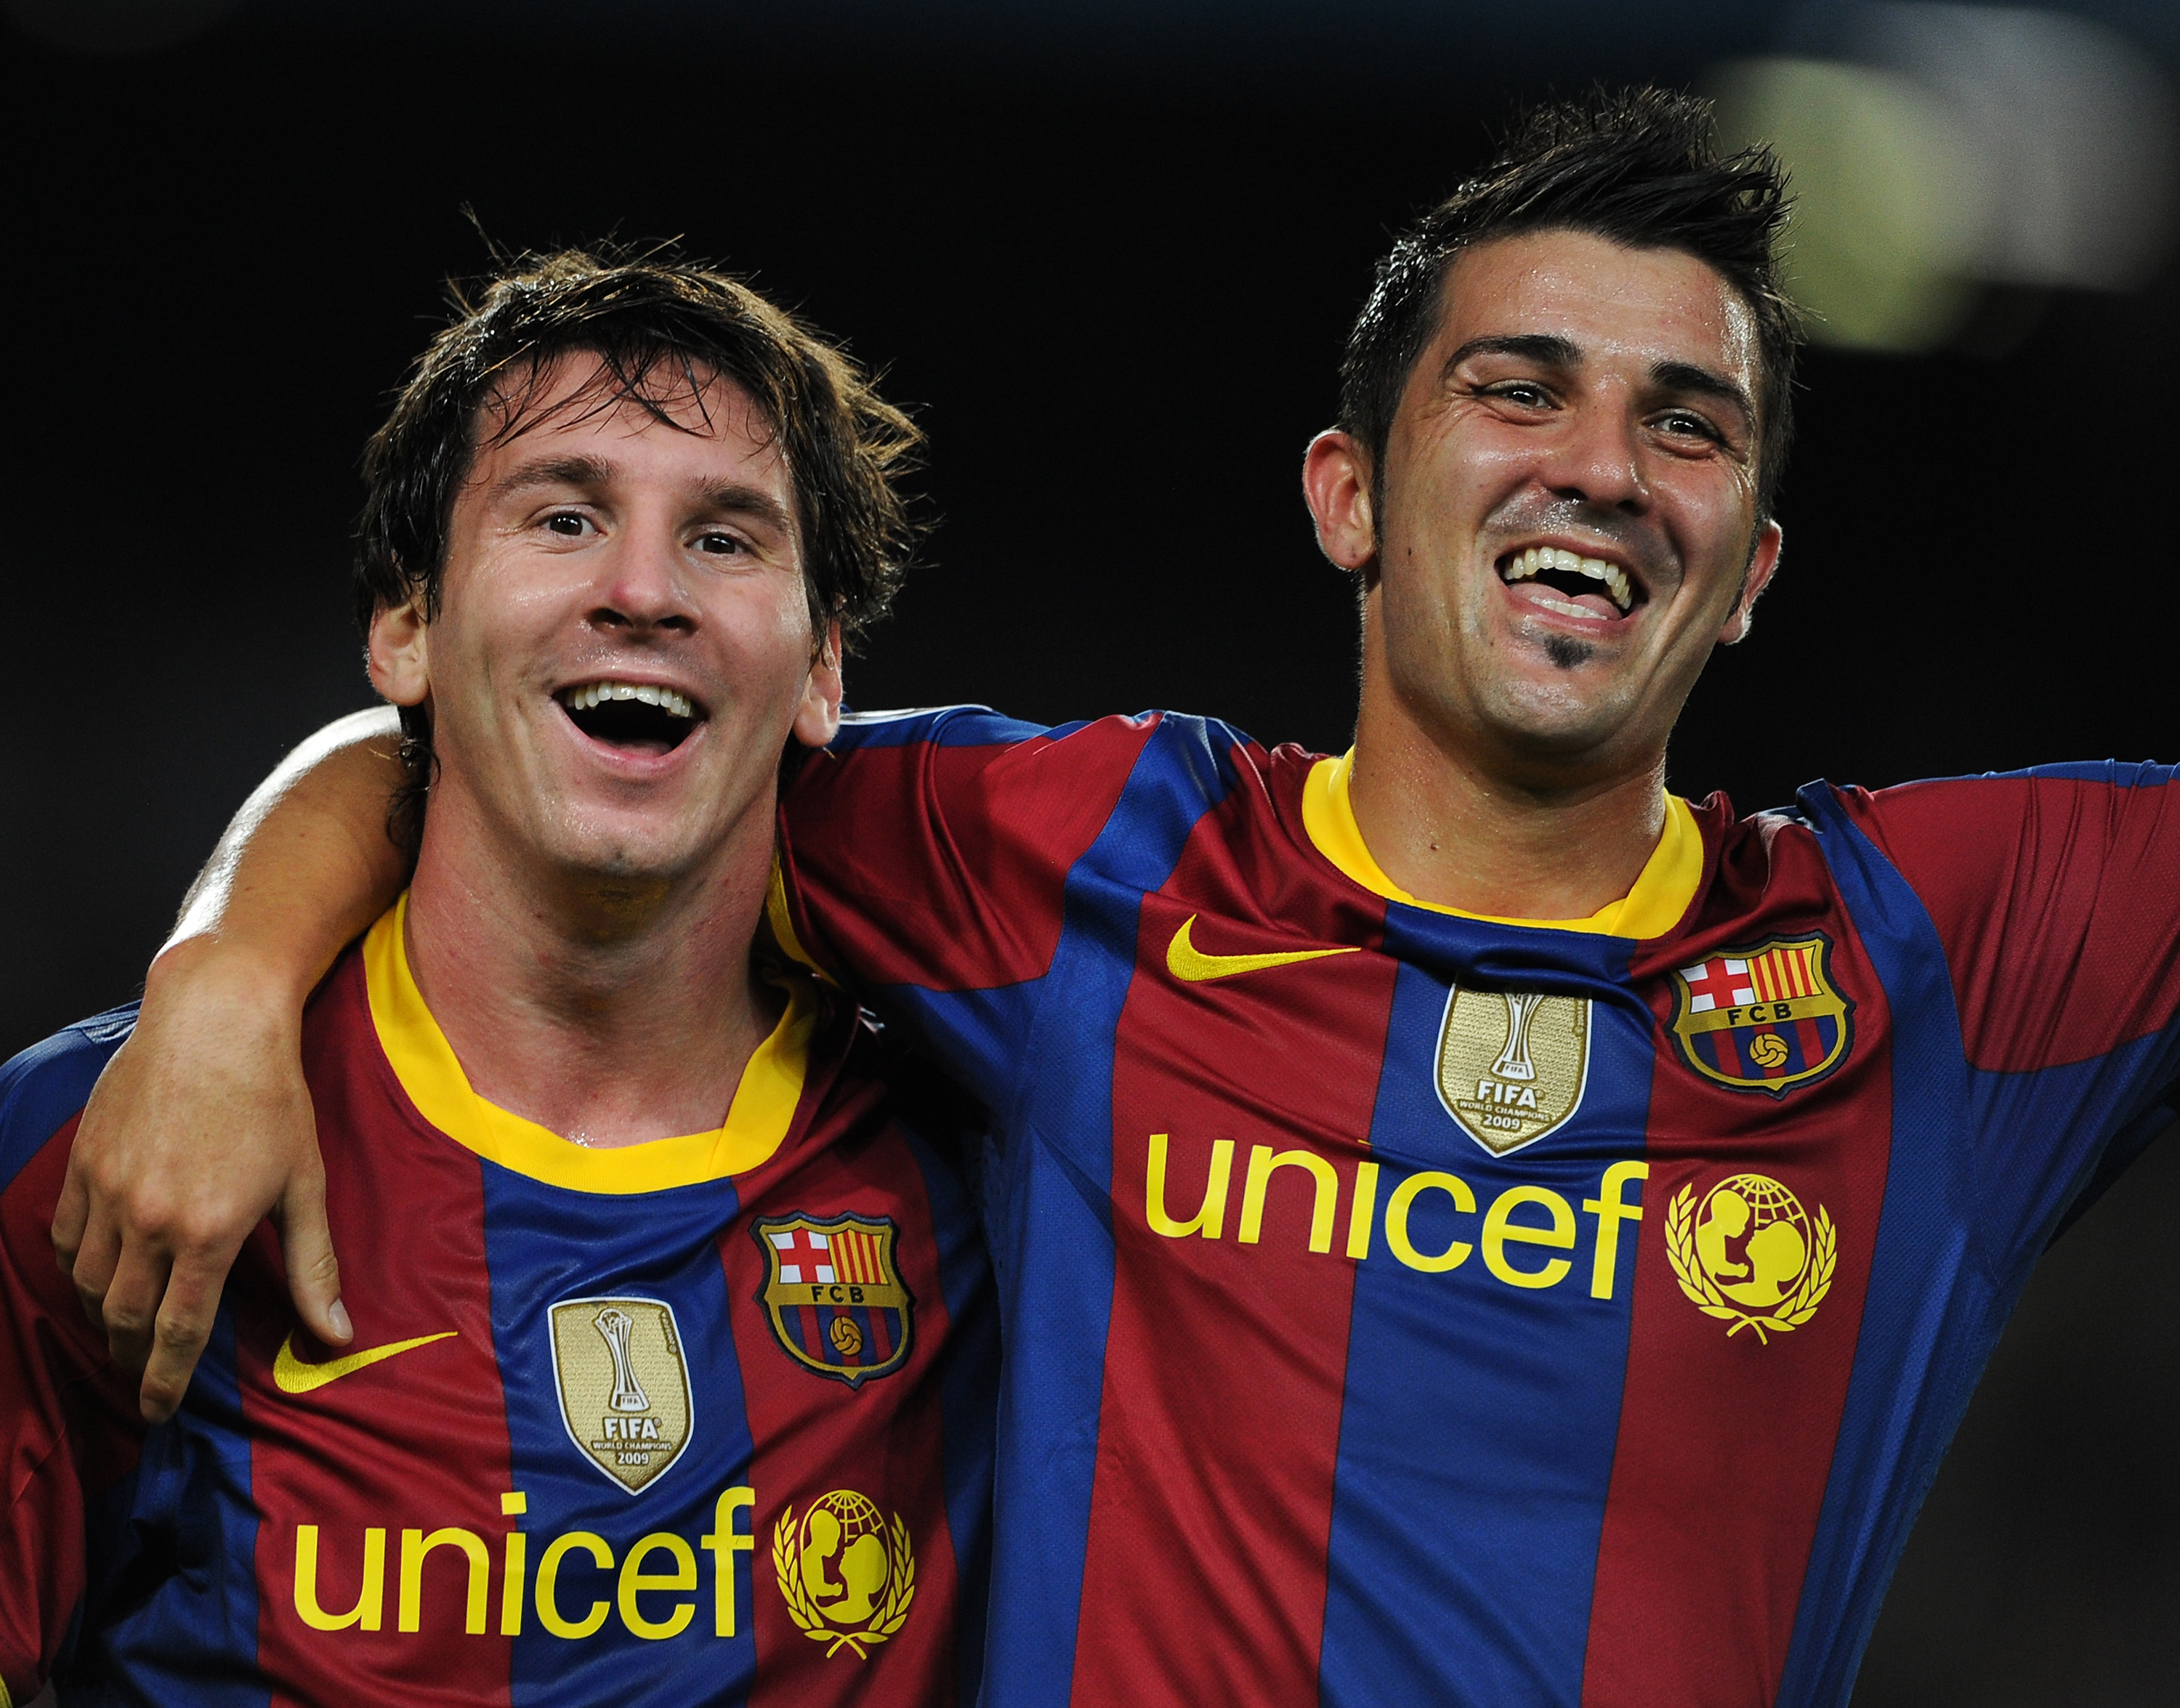 BARCELONA, SPAIN - SEPTEMBER 14:  David Villa (R) of Barcelona celebrates scoring his sides second goal with his teammate Lionel Messi during the UEFA Champions League group D match between Barcelona and Panathinaikos on September 14, 2010 in Barcelona, S